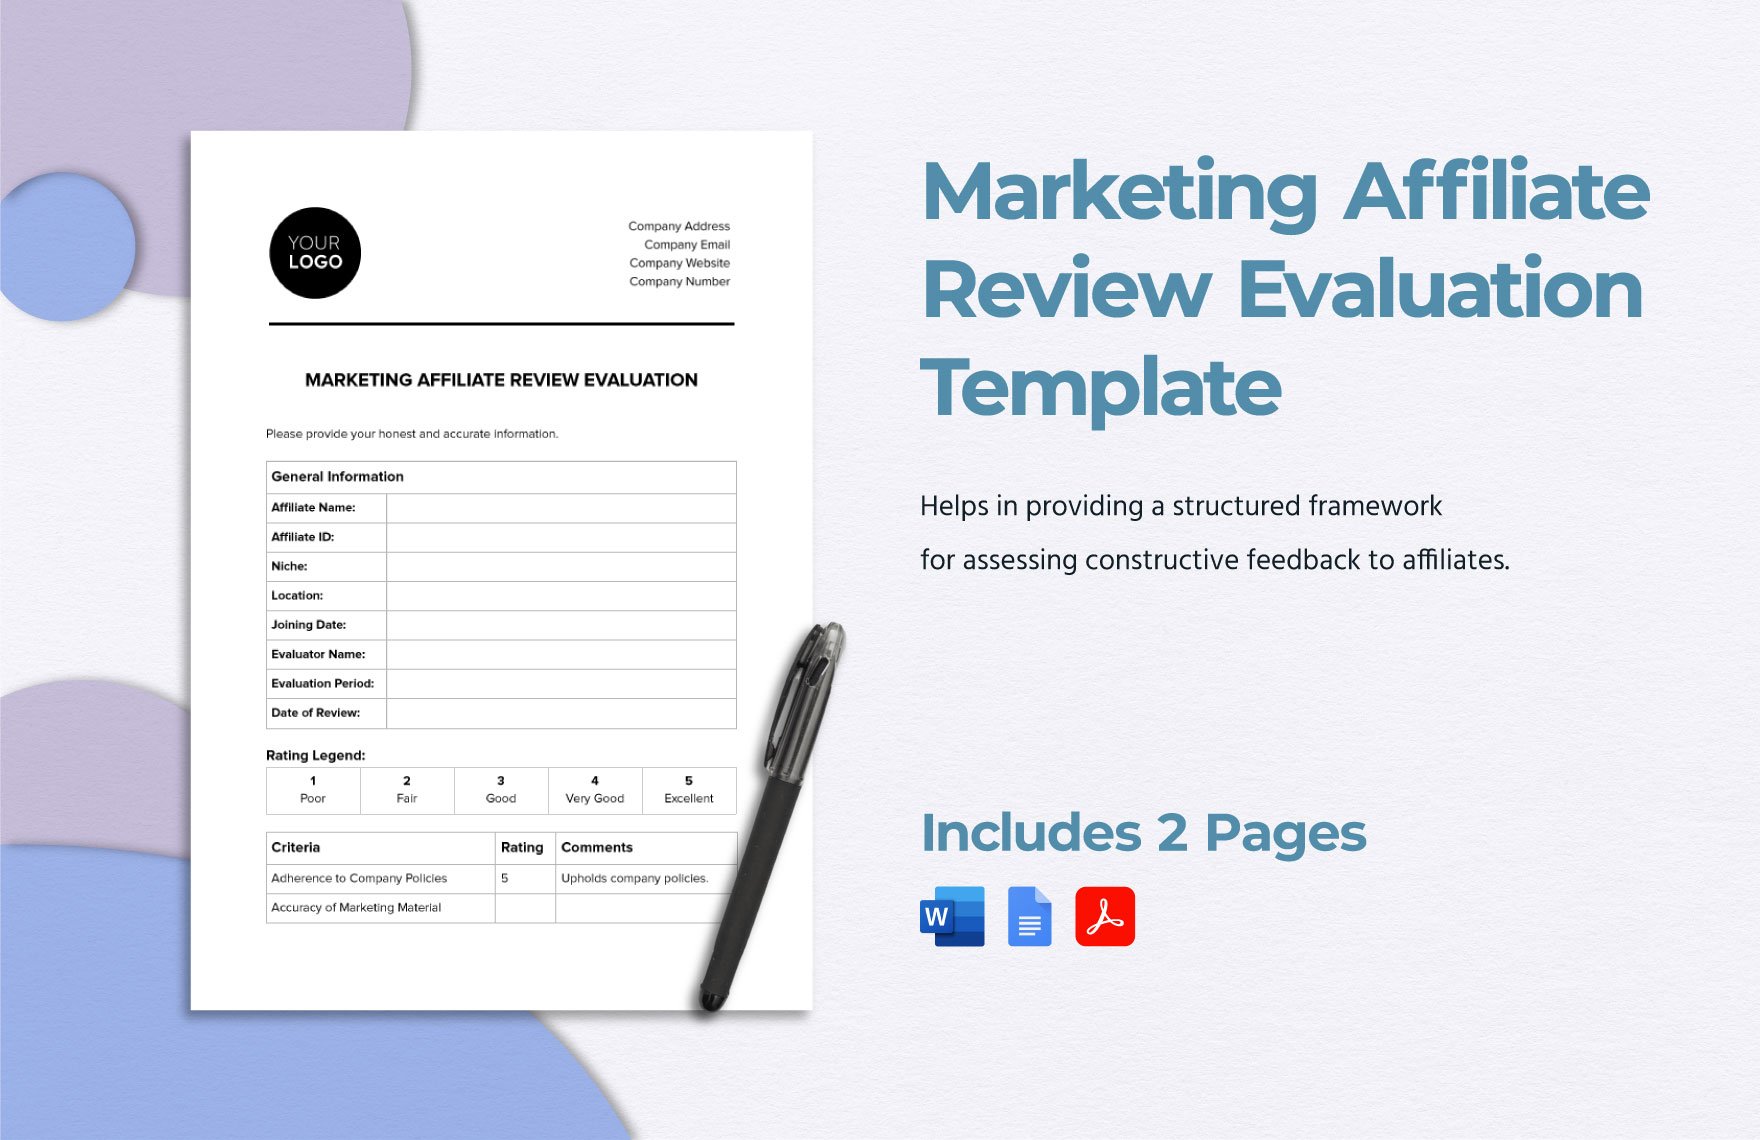 Marketing Affiliate Review Evaluation Template in Word, Google Docs, PDF